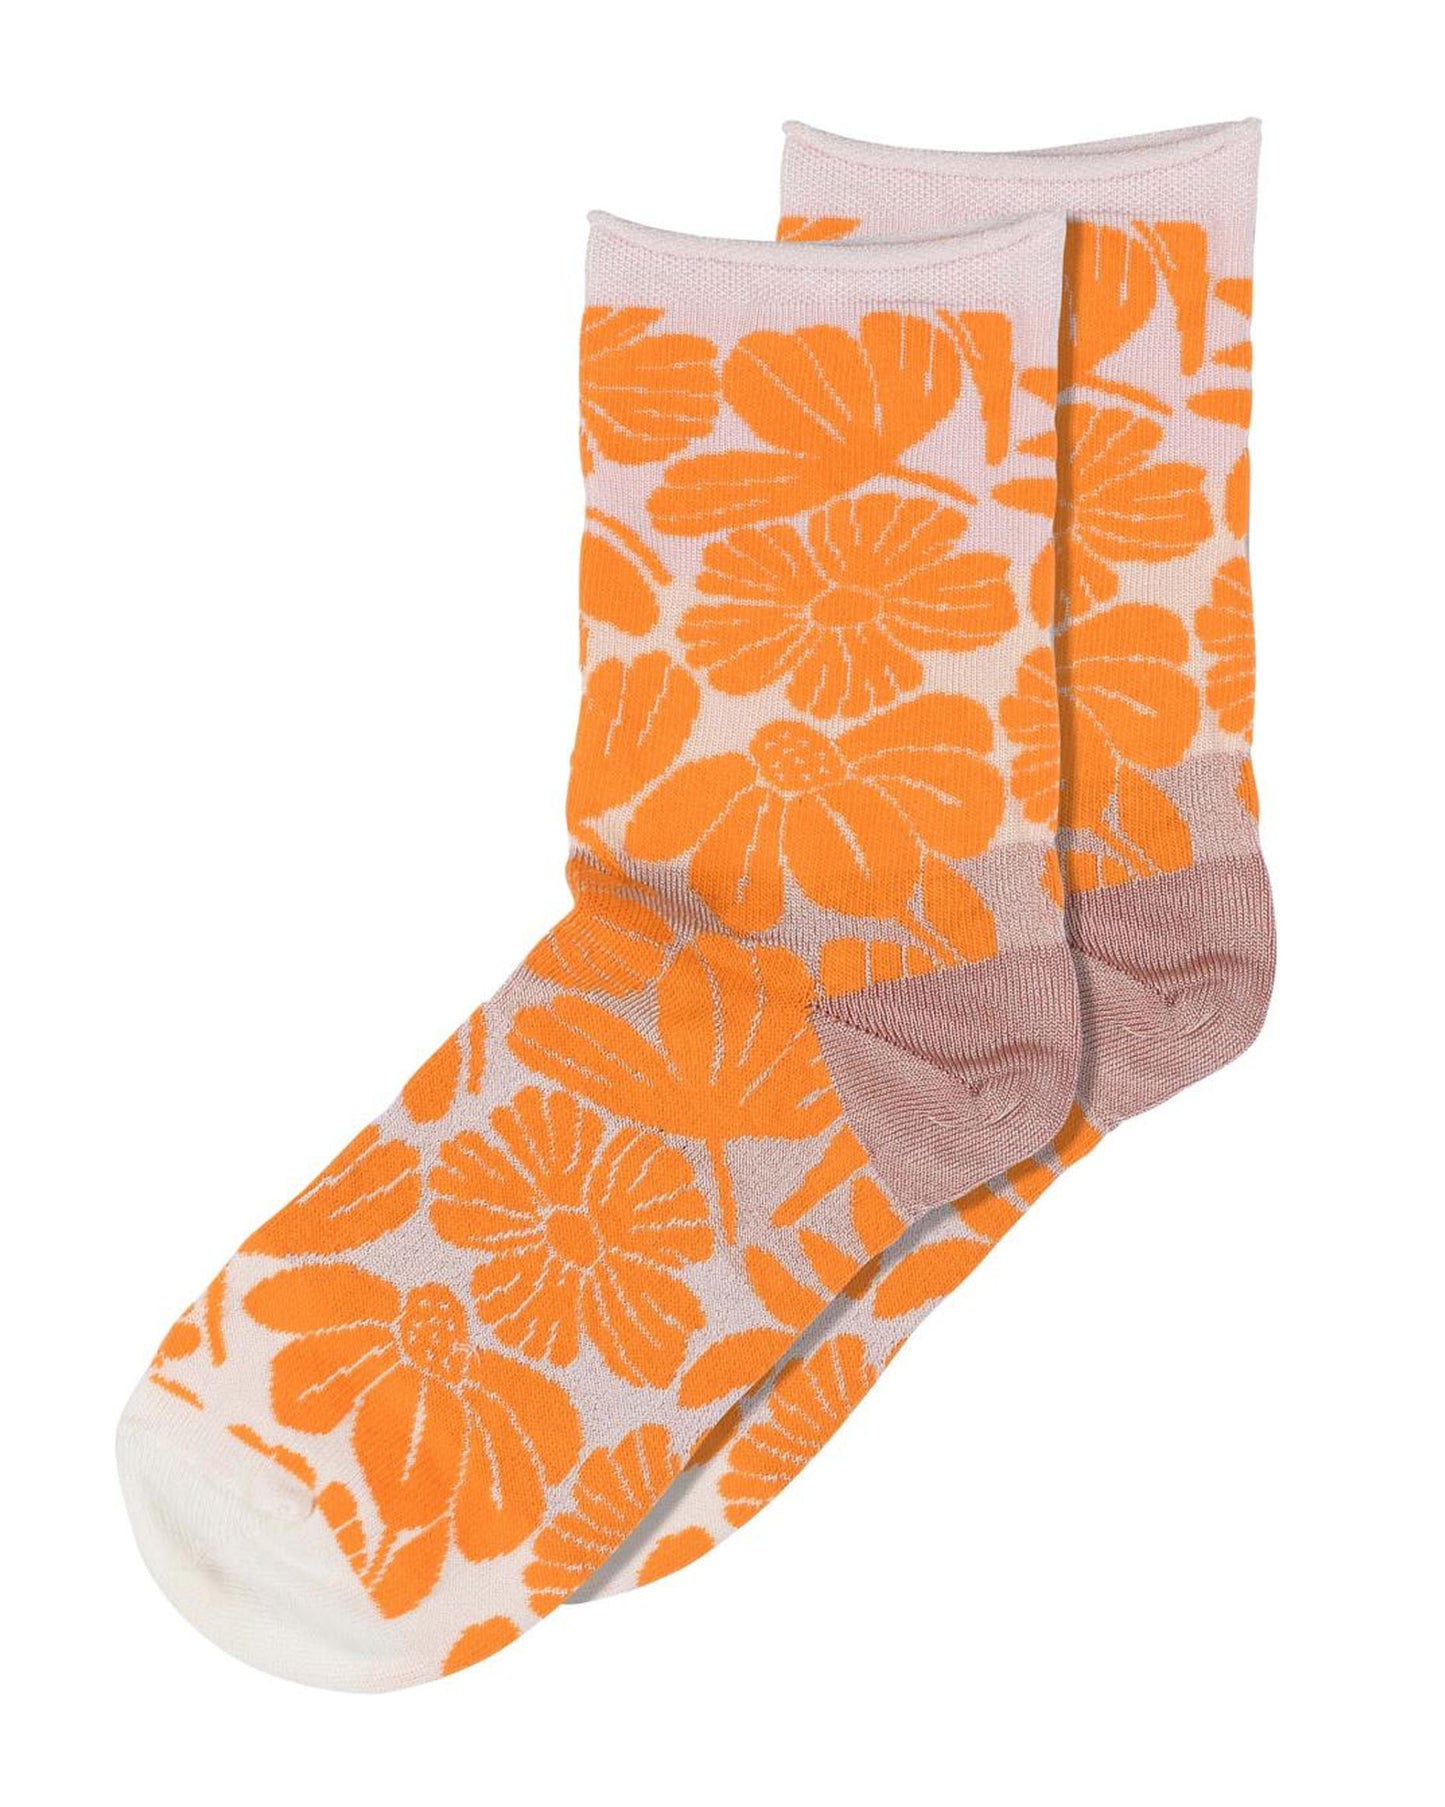 MP Denmark 77728 Nicole Sock - Light pale grey cotton mix fashion ankle socks with an all over woven orange floral pattern and no cuff roll top edge.